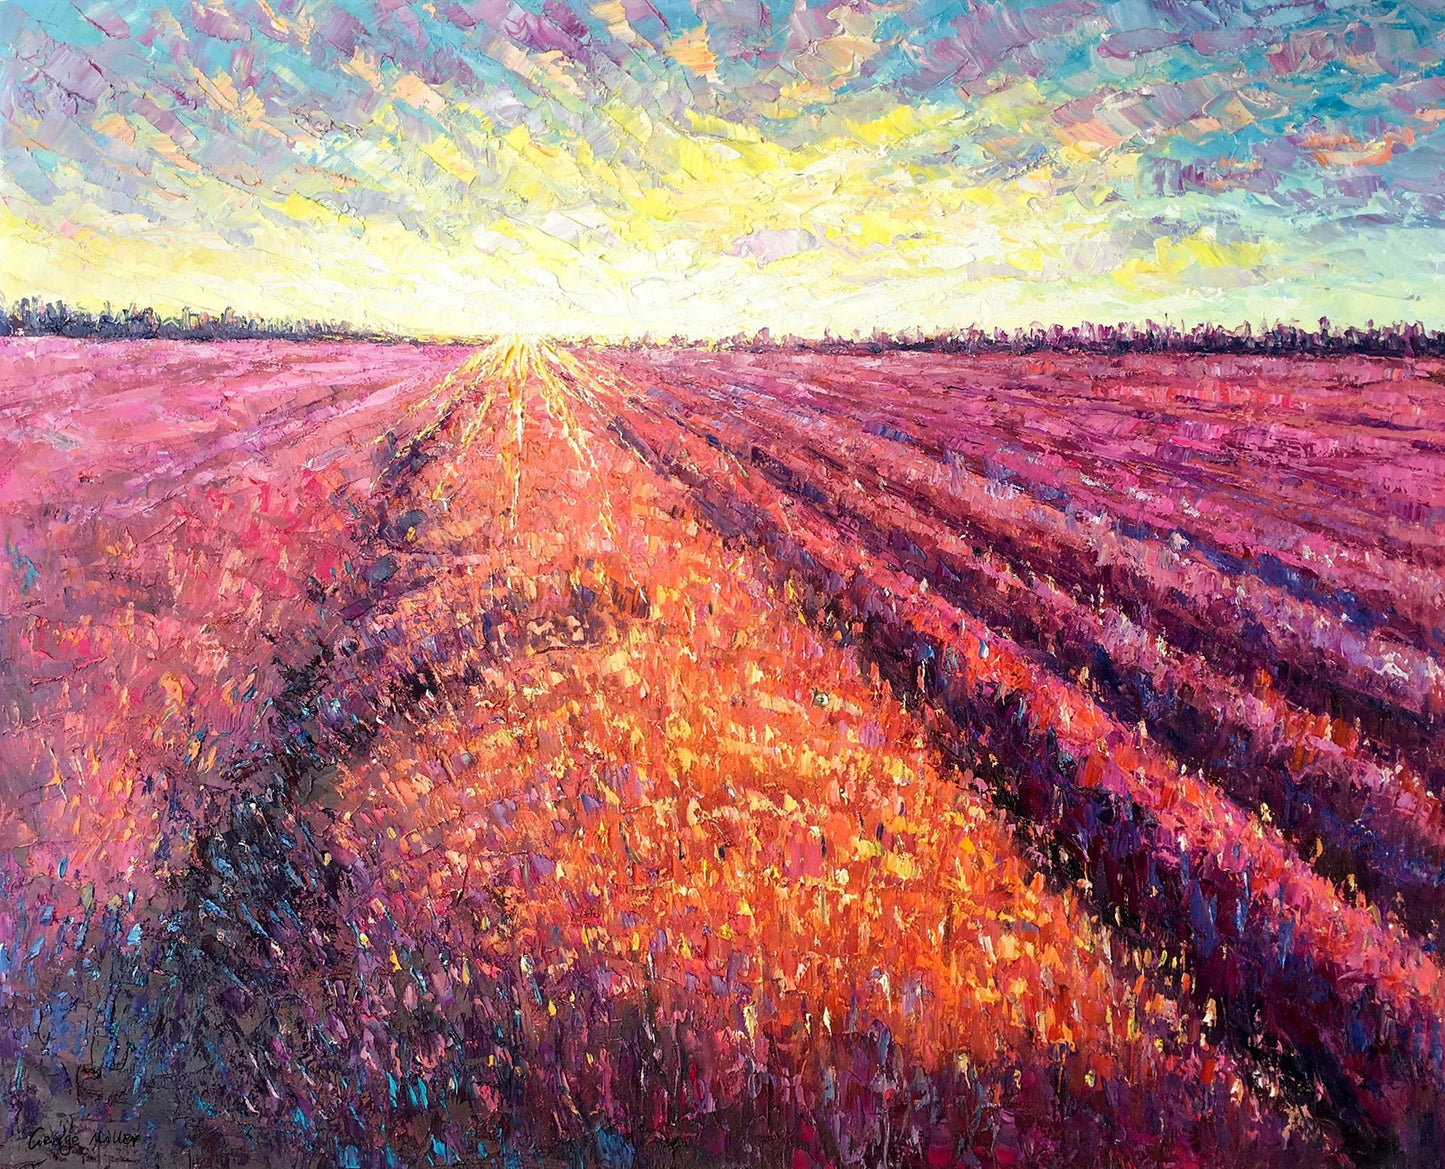 Landscape Oil Painting French Provence Lavender Fields at Dawn, Living Room Decor, Abstract Oil Painting, Abstract Canvas Art, Wall Decor